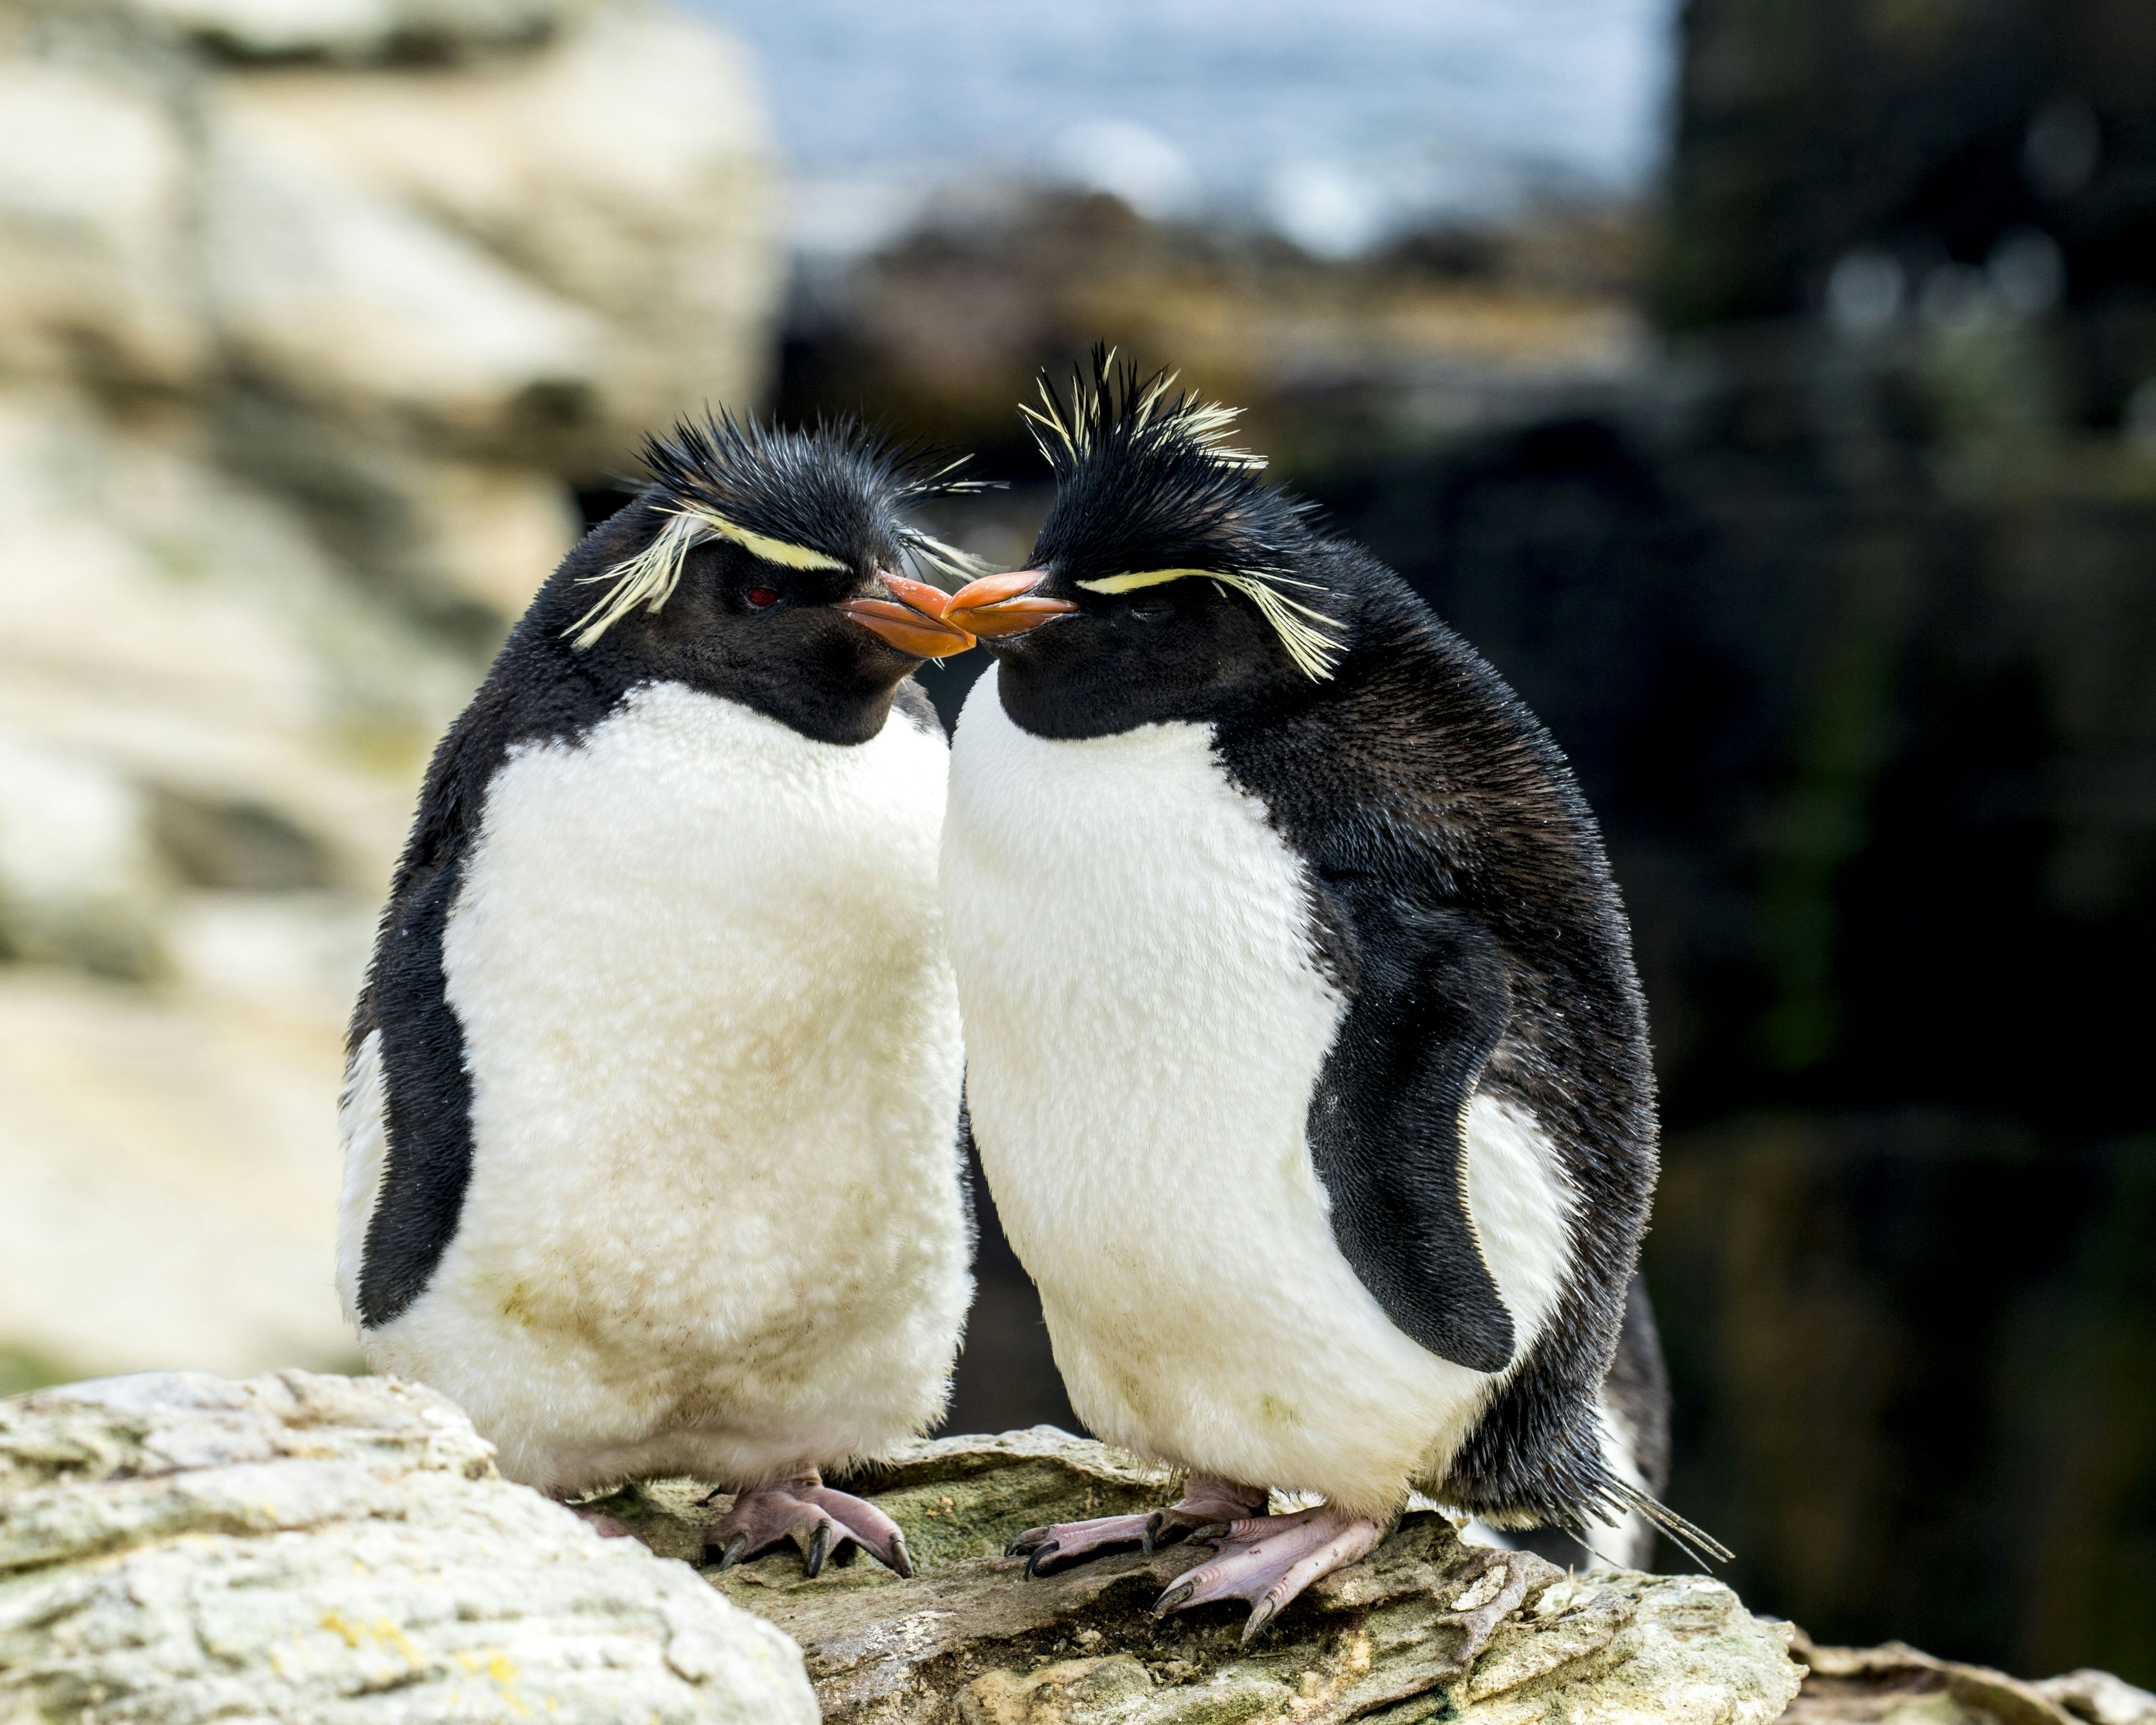 Two macaroni penguins with yellow hair huddle together